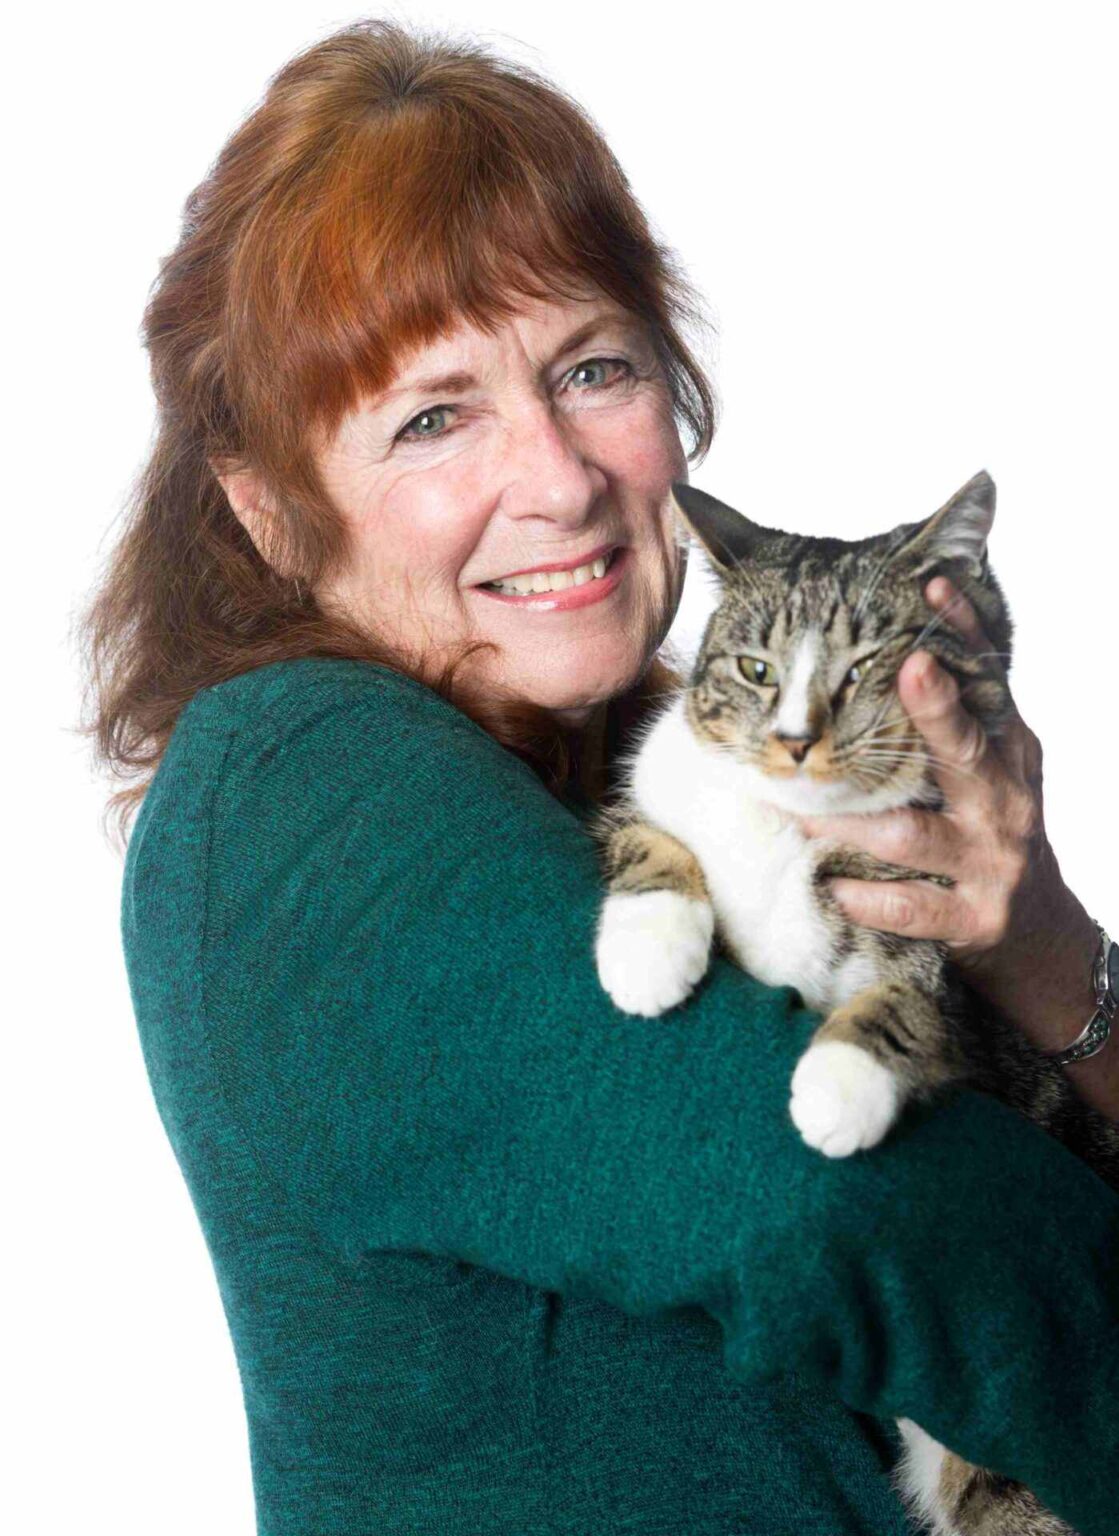 A woman holding a cat in her arms.